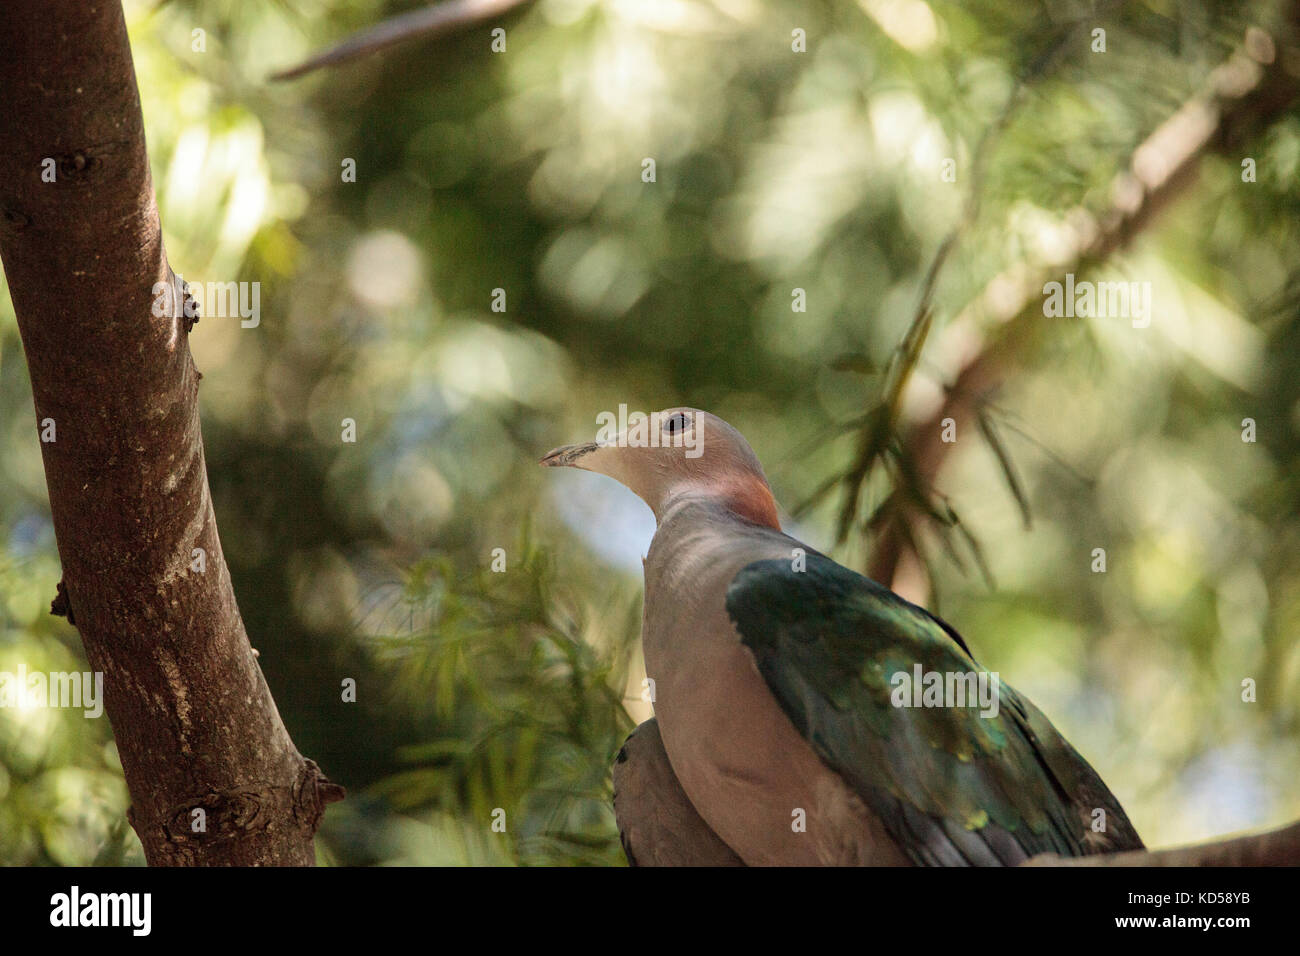 Green Imperial pigeon called Ducula aenea is found in the Sulawesi Islands in Indonesia Stock Photo